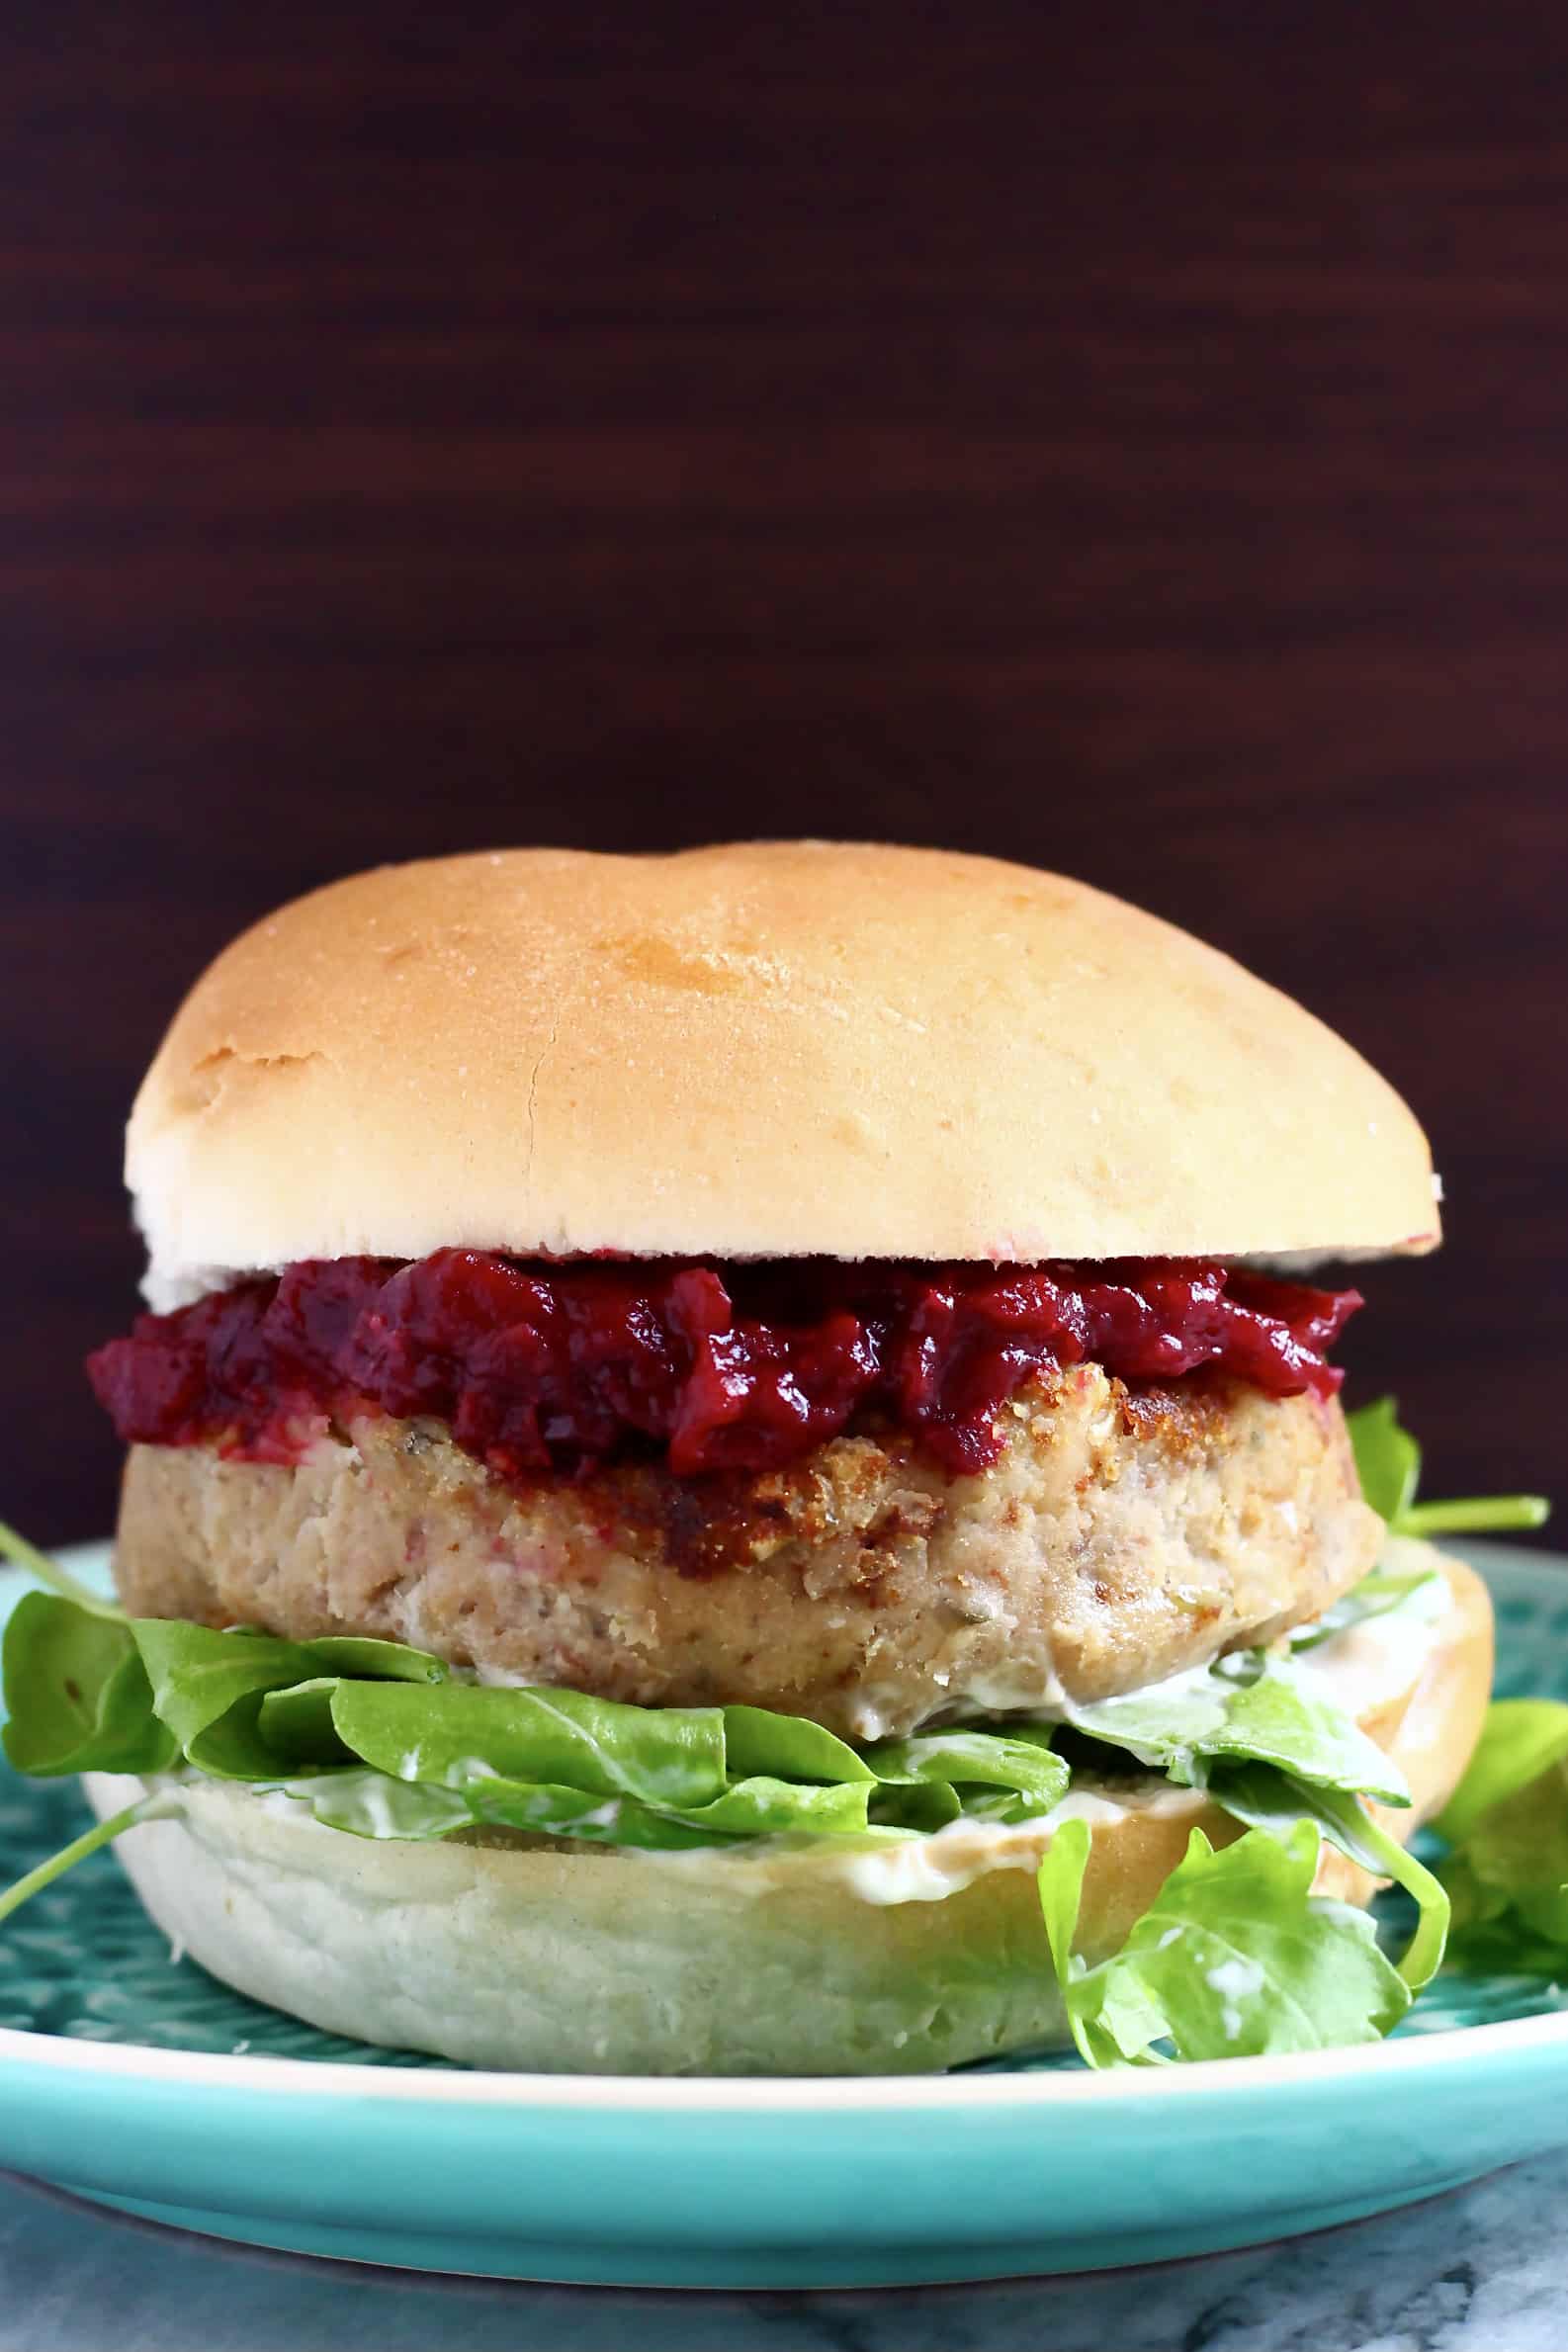 Vegan Christmas burger with cranberry sauce and rocket against a dark brown background